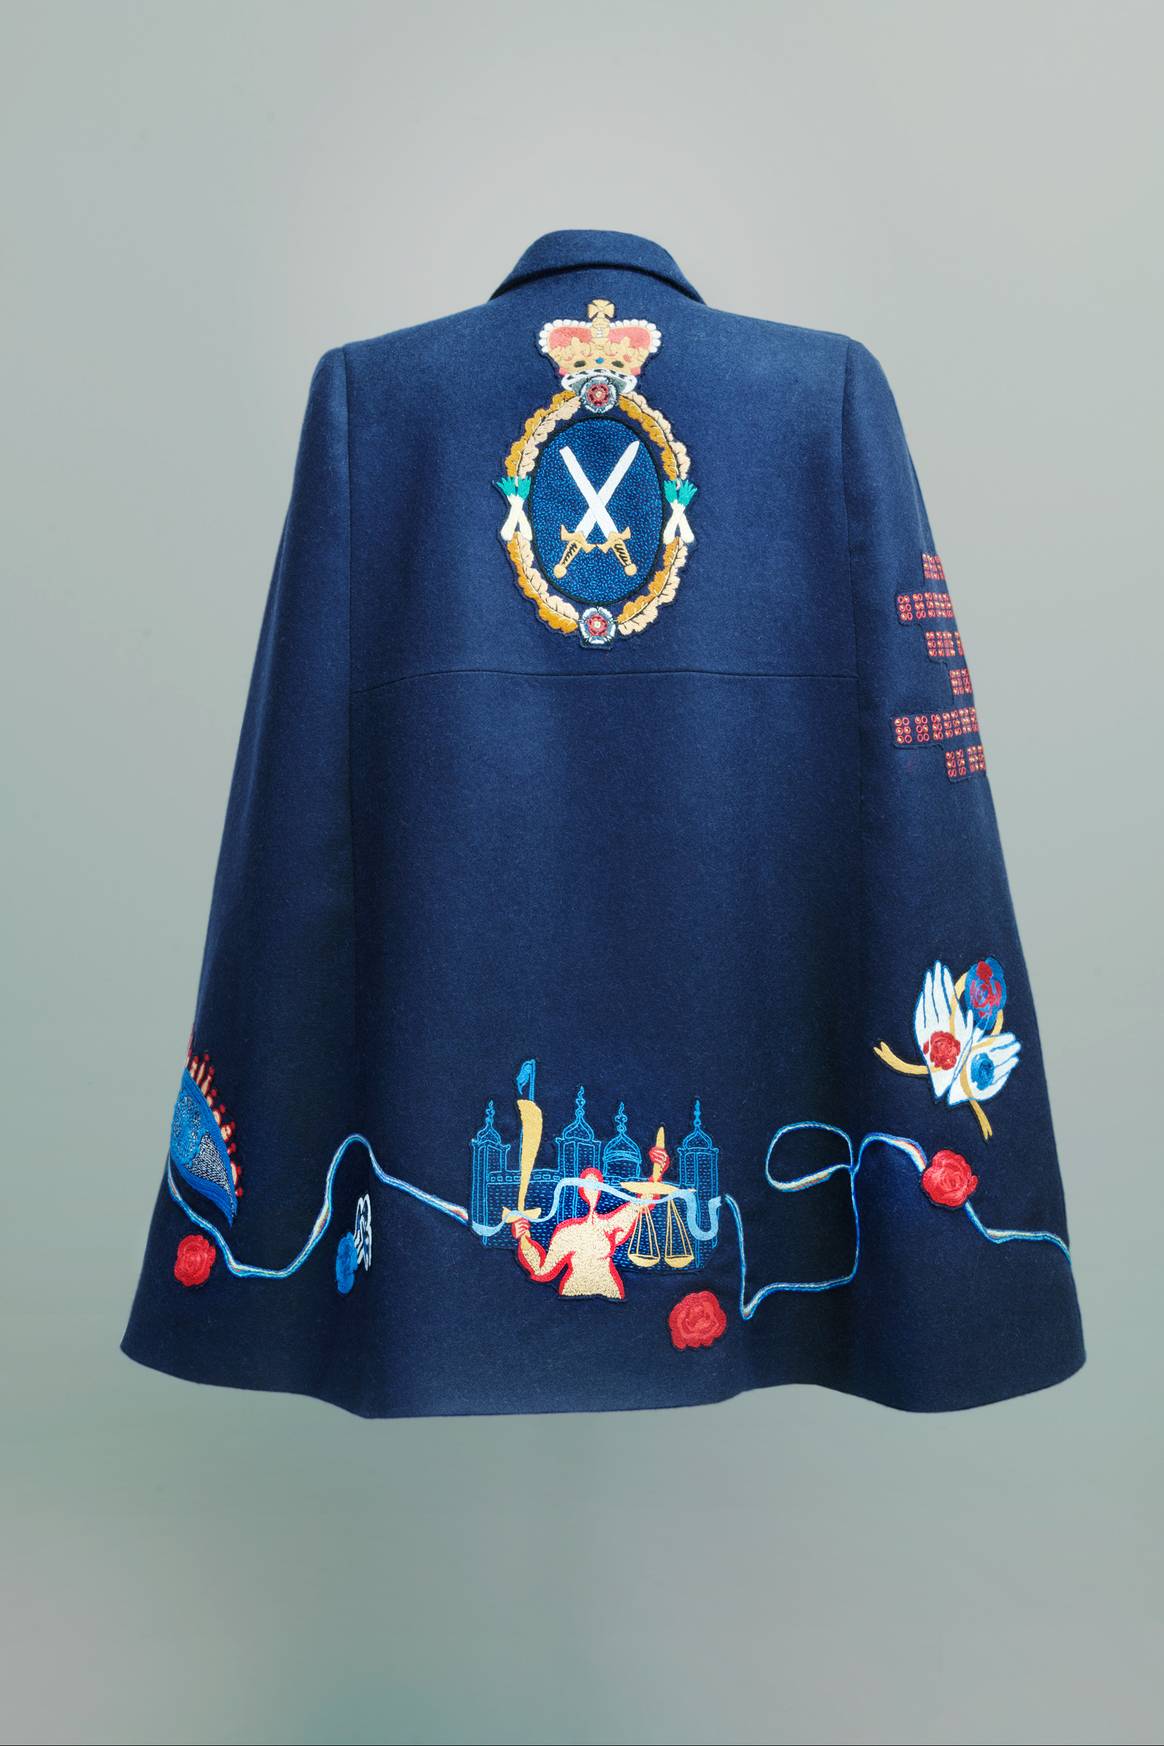 The first garment created for the High Sheriff of Greater London featuring designs from London College of Fashion, UAL’s BA Fashion Imaging and illustration course.